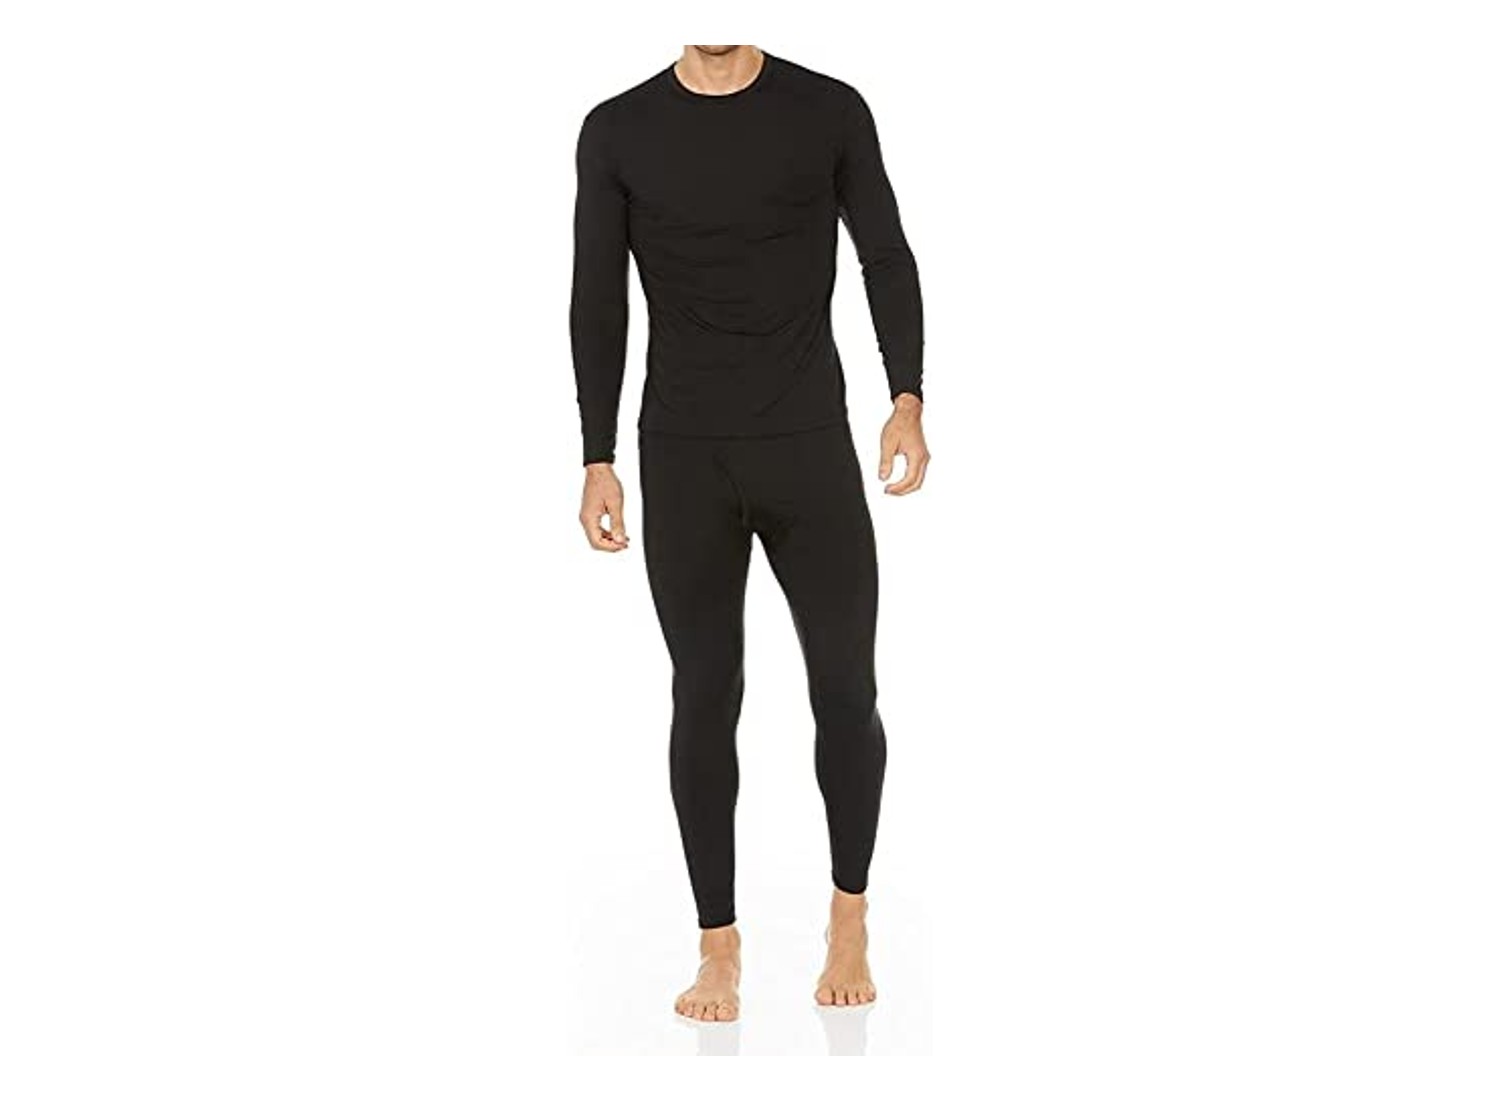 thermal underwear review